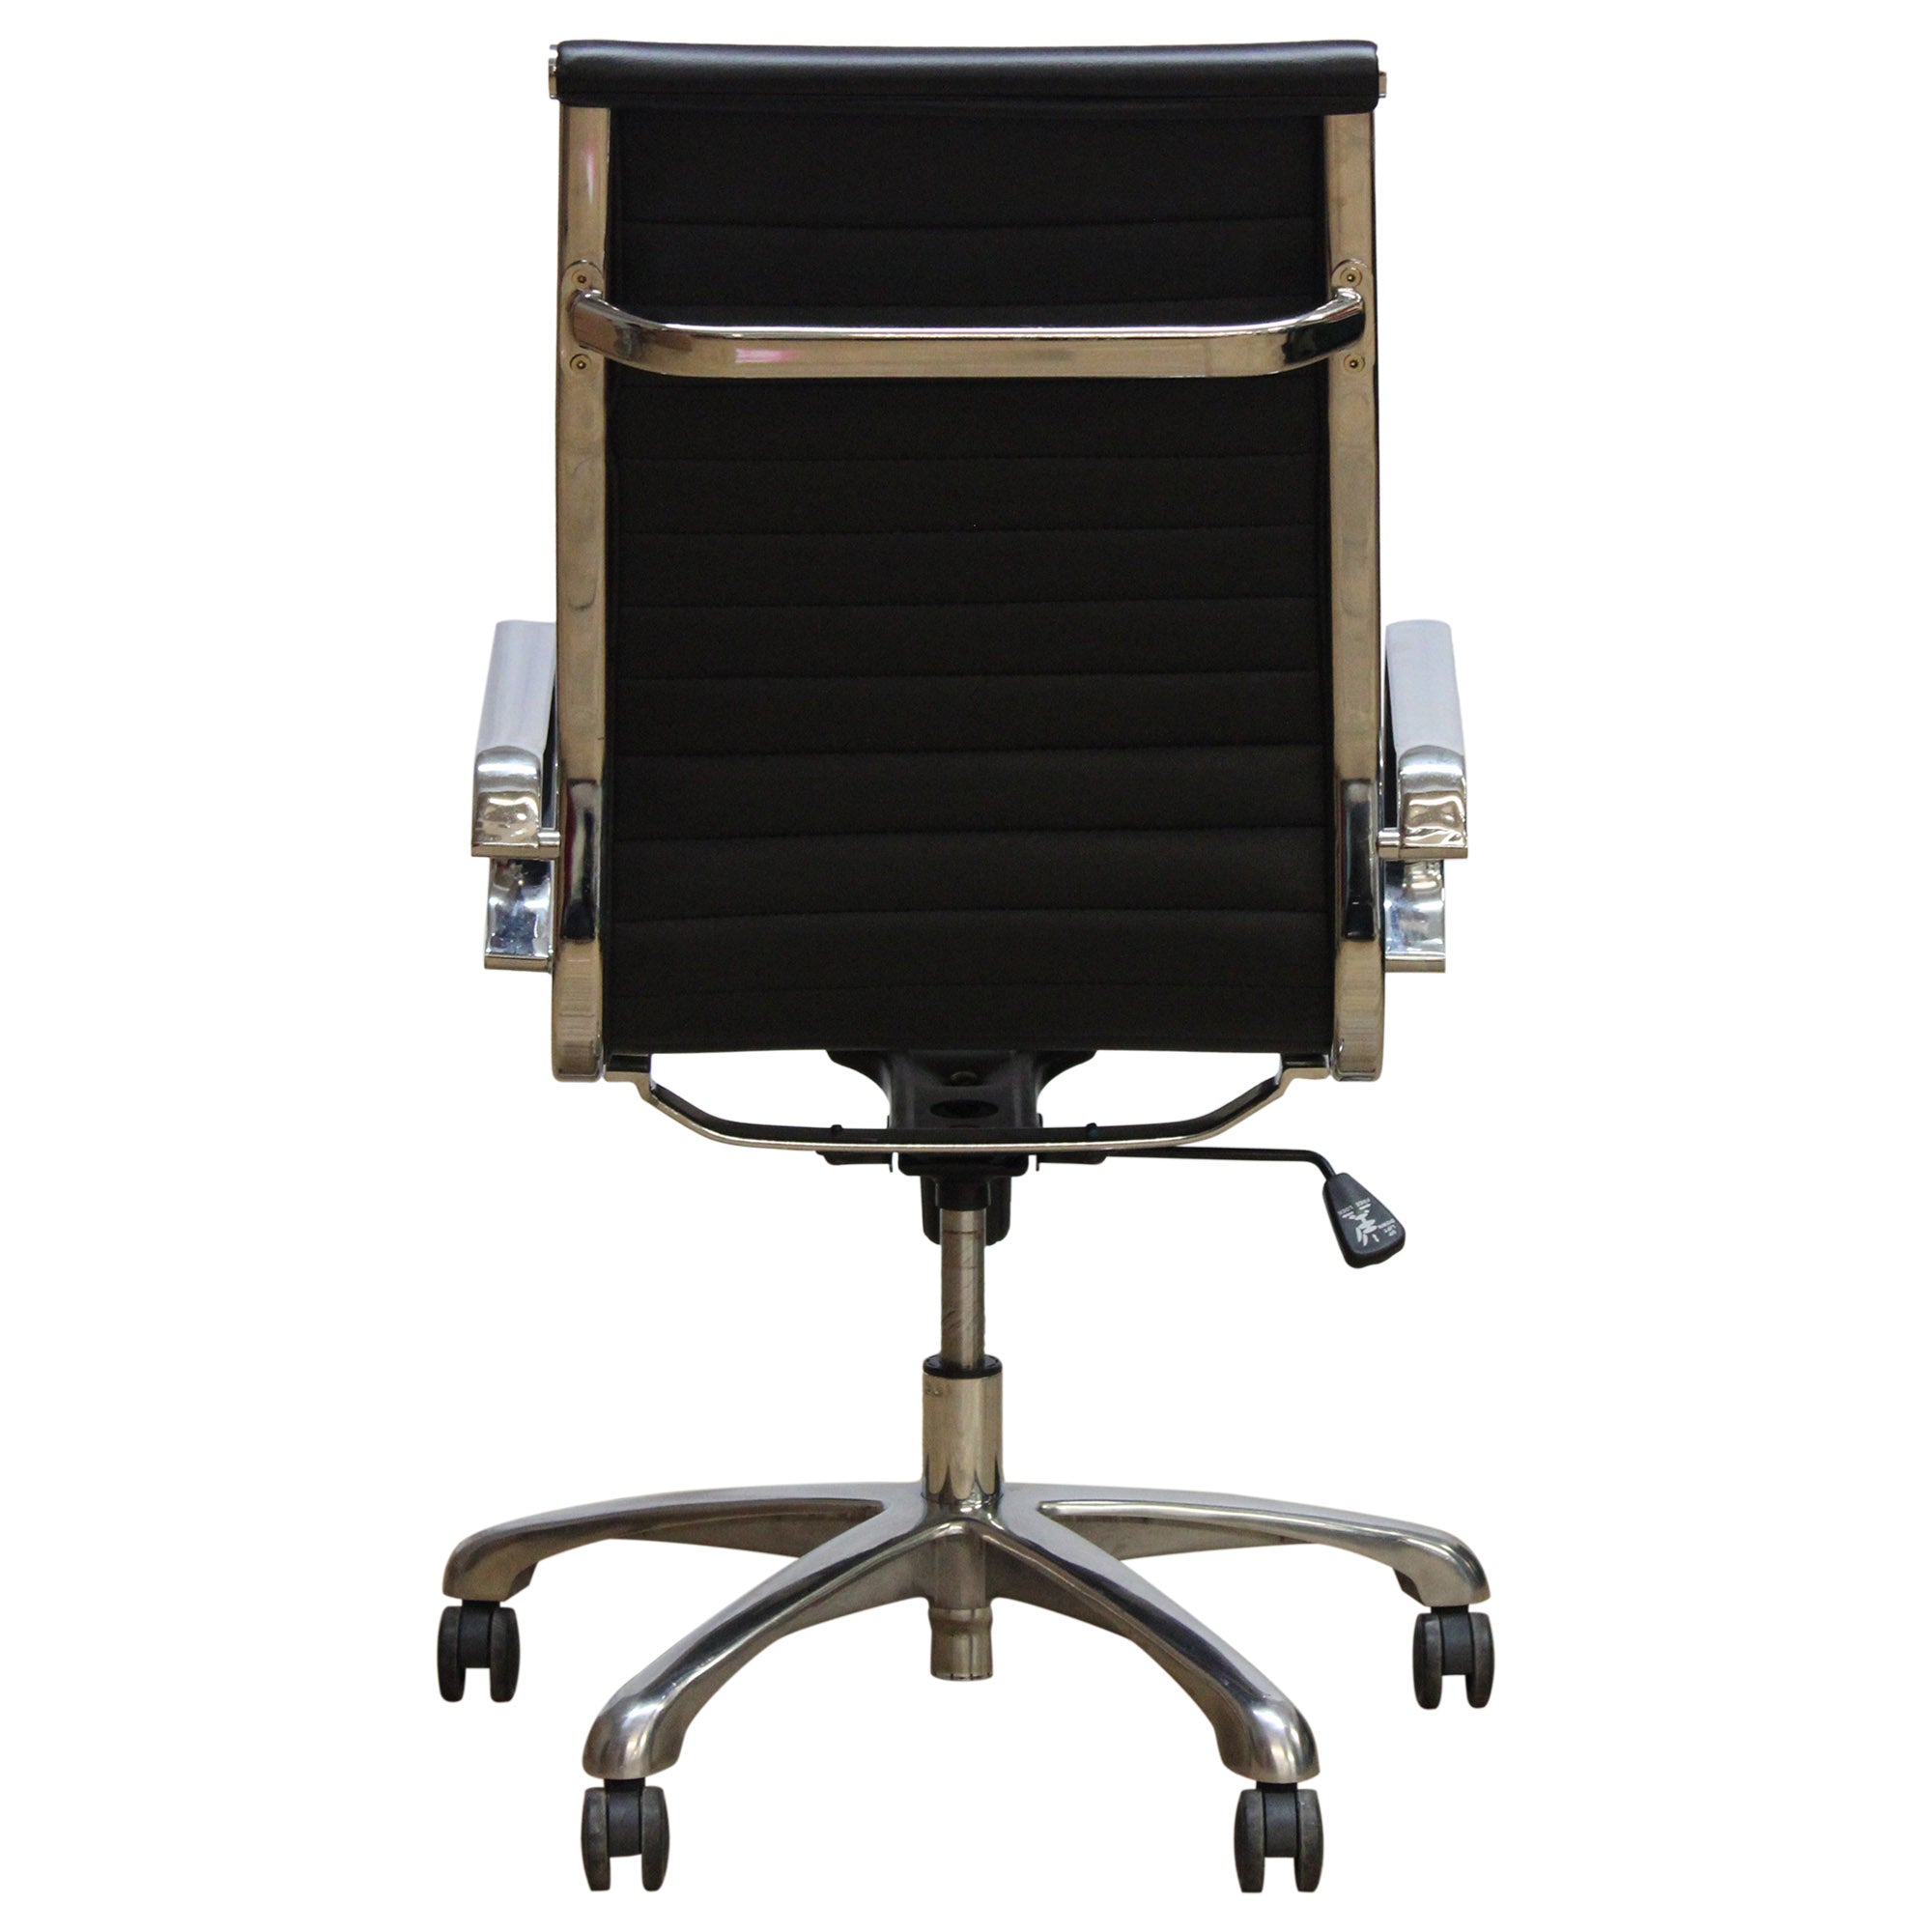 Woodstock Marketing Joe High Back Conference Chair, Black - Preowned